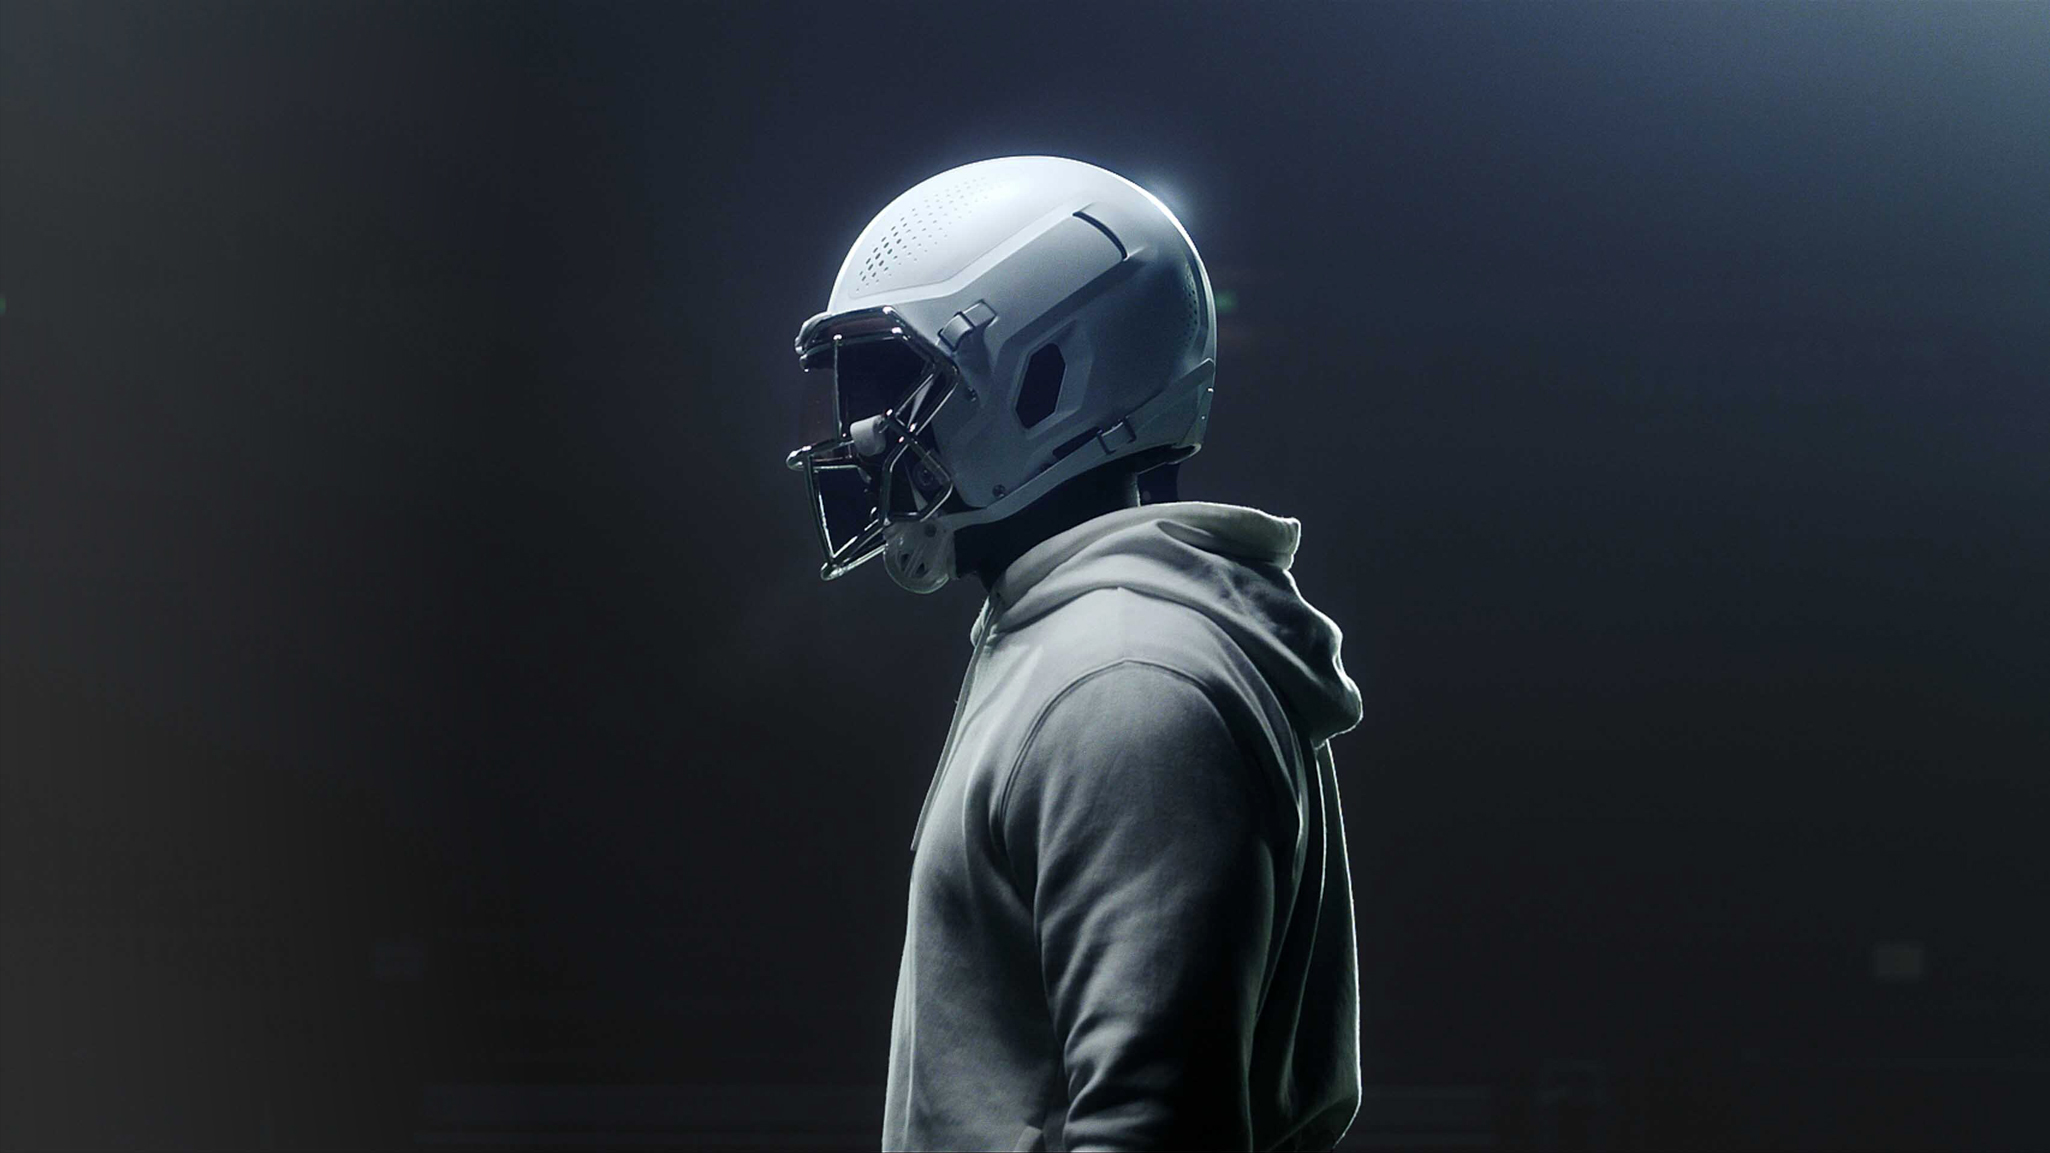 Vicis Ran Out Of Cash And Lost Its Founders But Is Still Making Super Bowl Ready Helmets